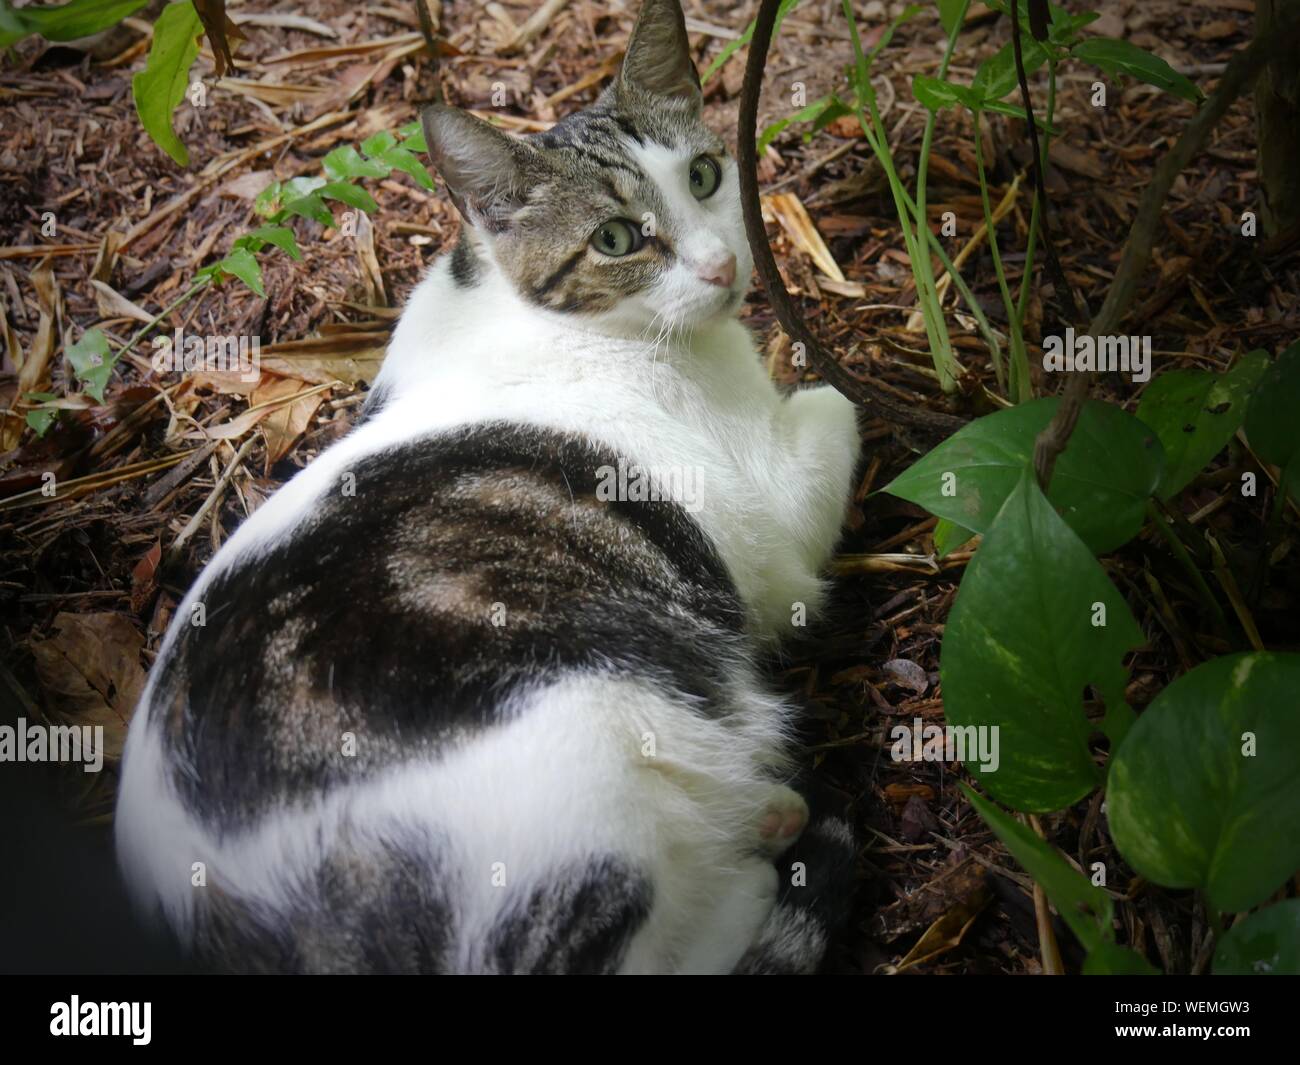 Cute cat relaxing at the Hemingway gardens in Key West, Florida. Stock Photo